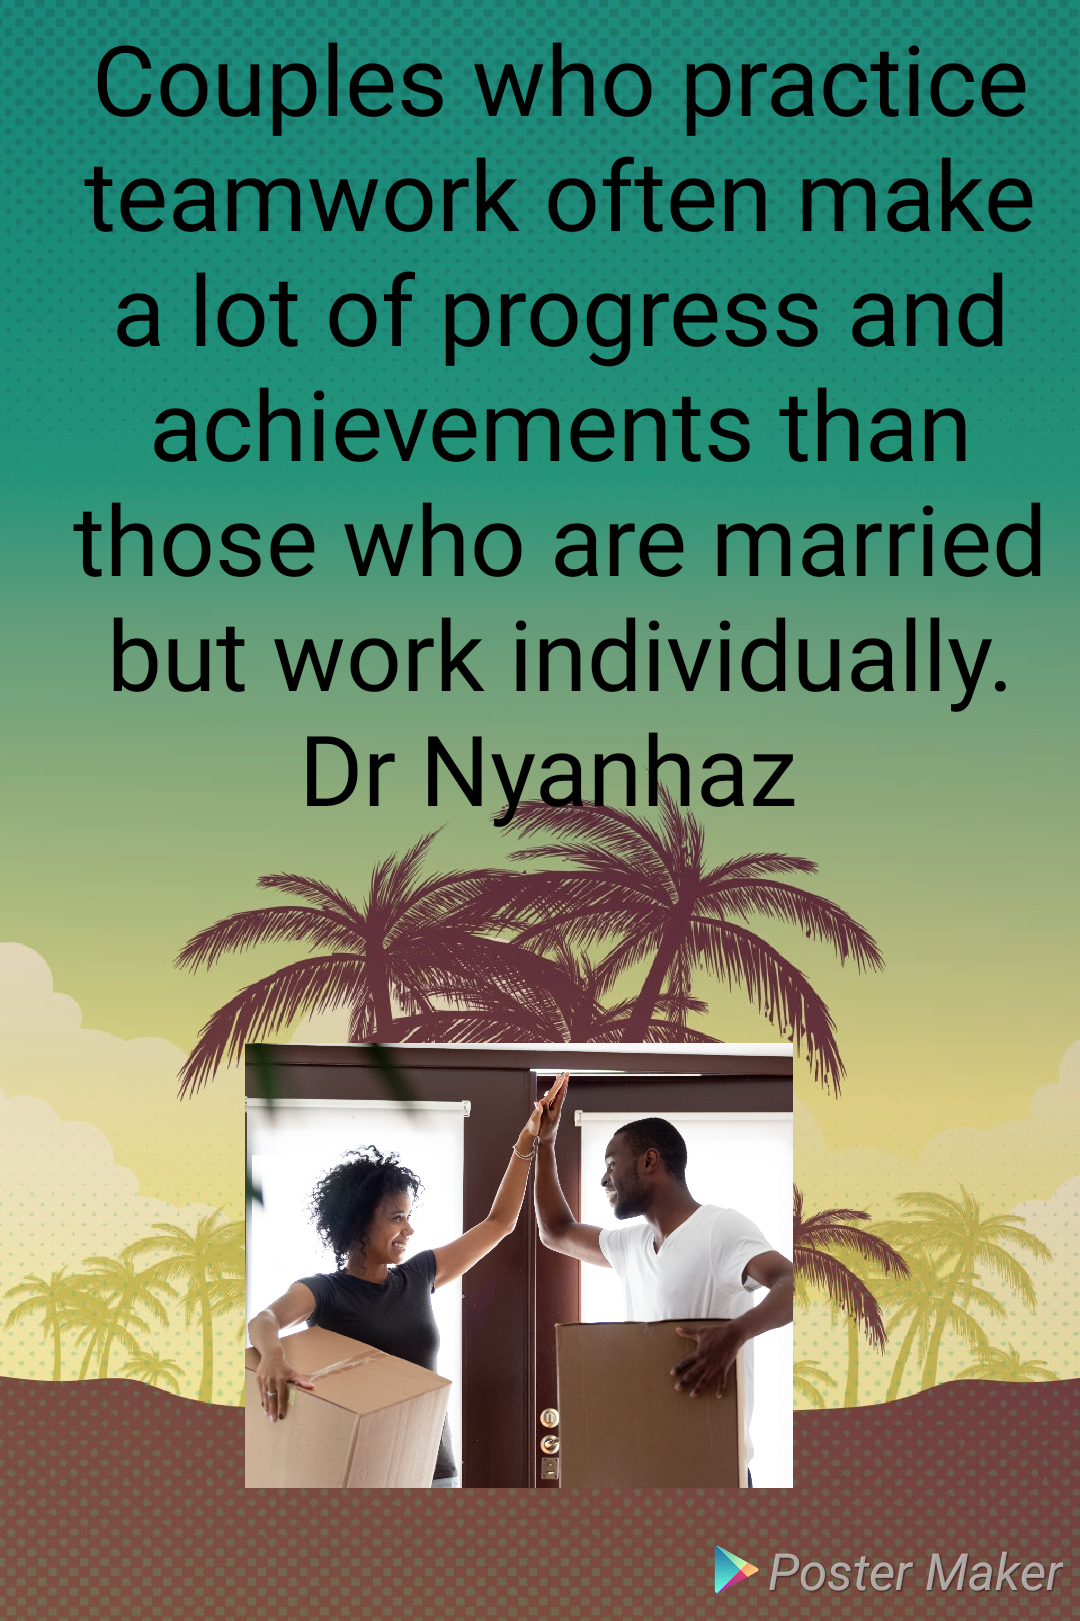 Marriage=working together=greater achievements